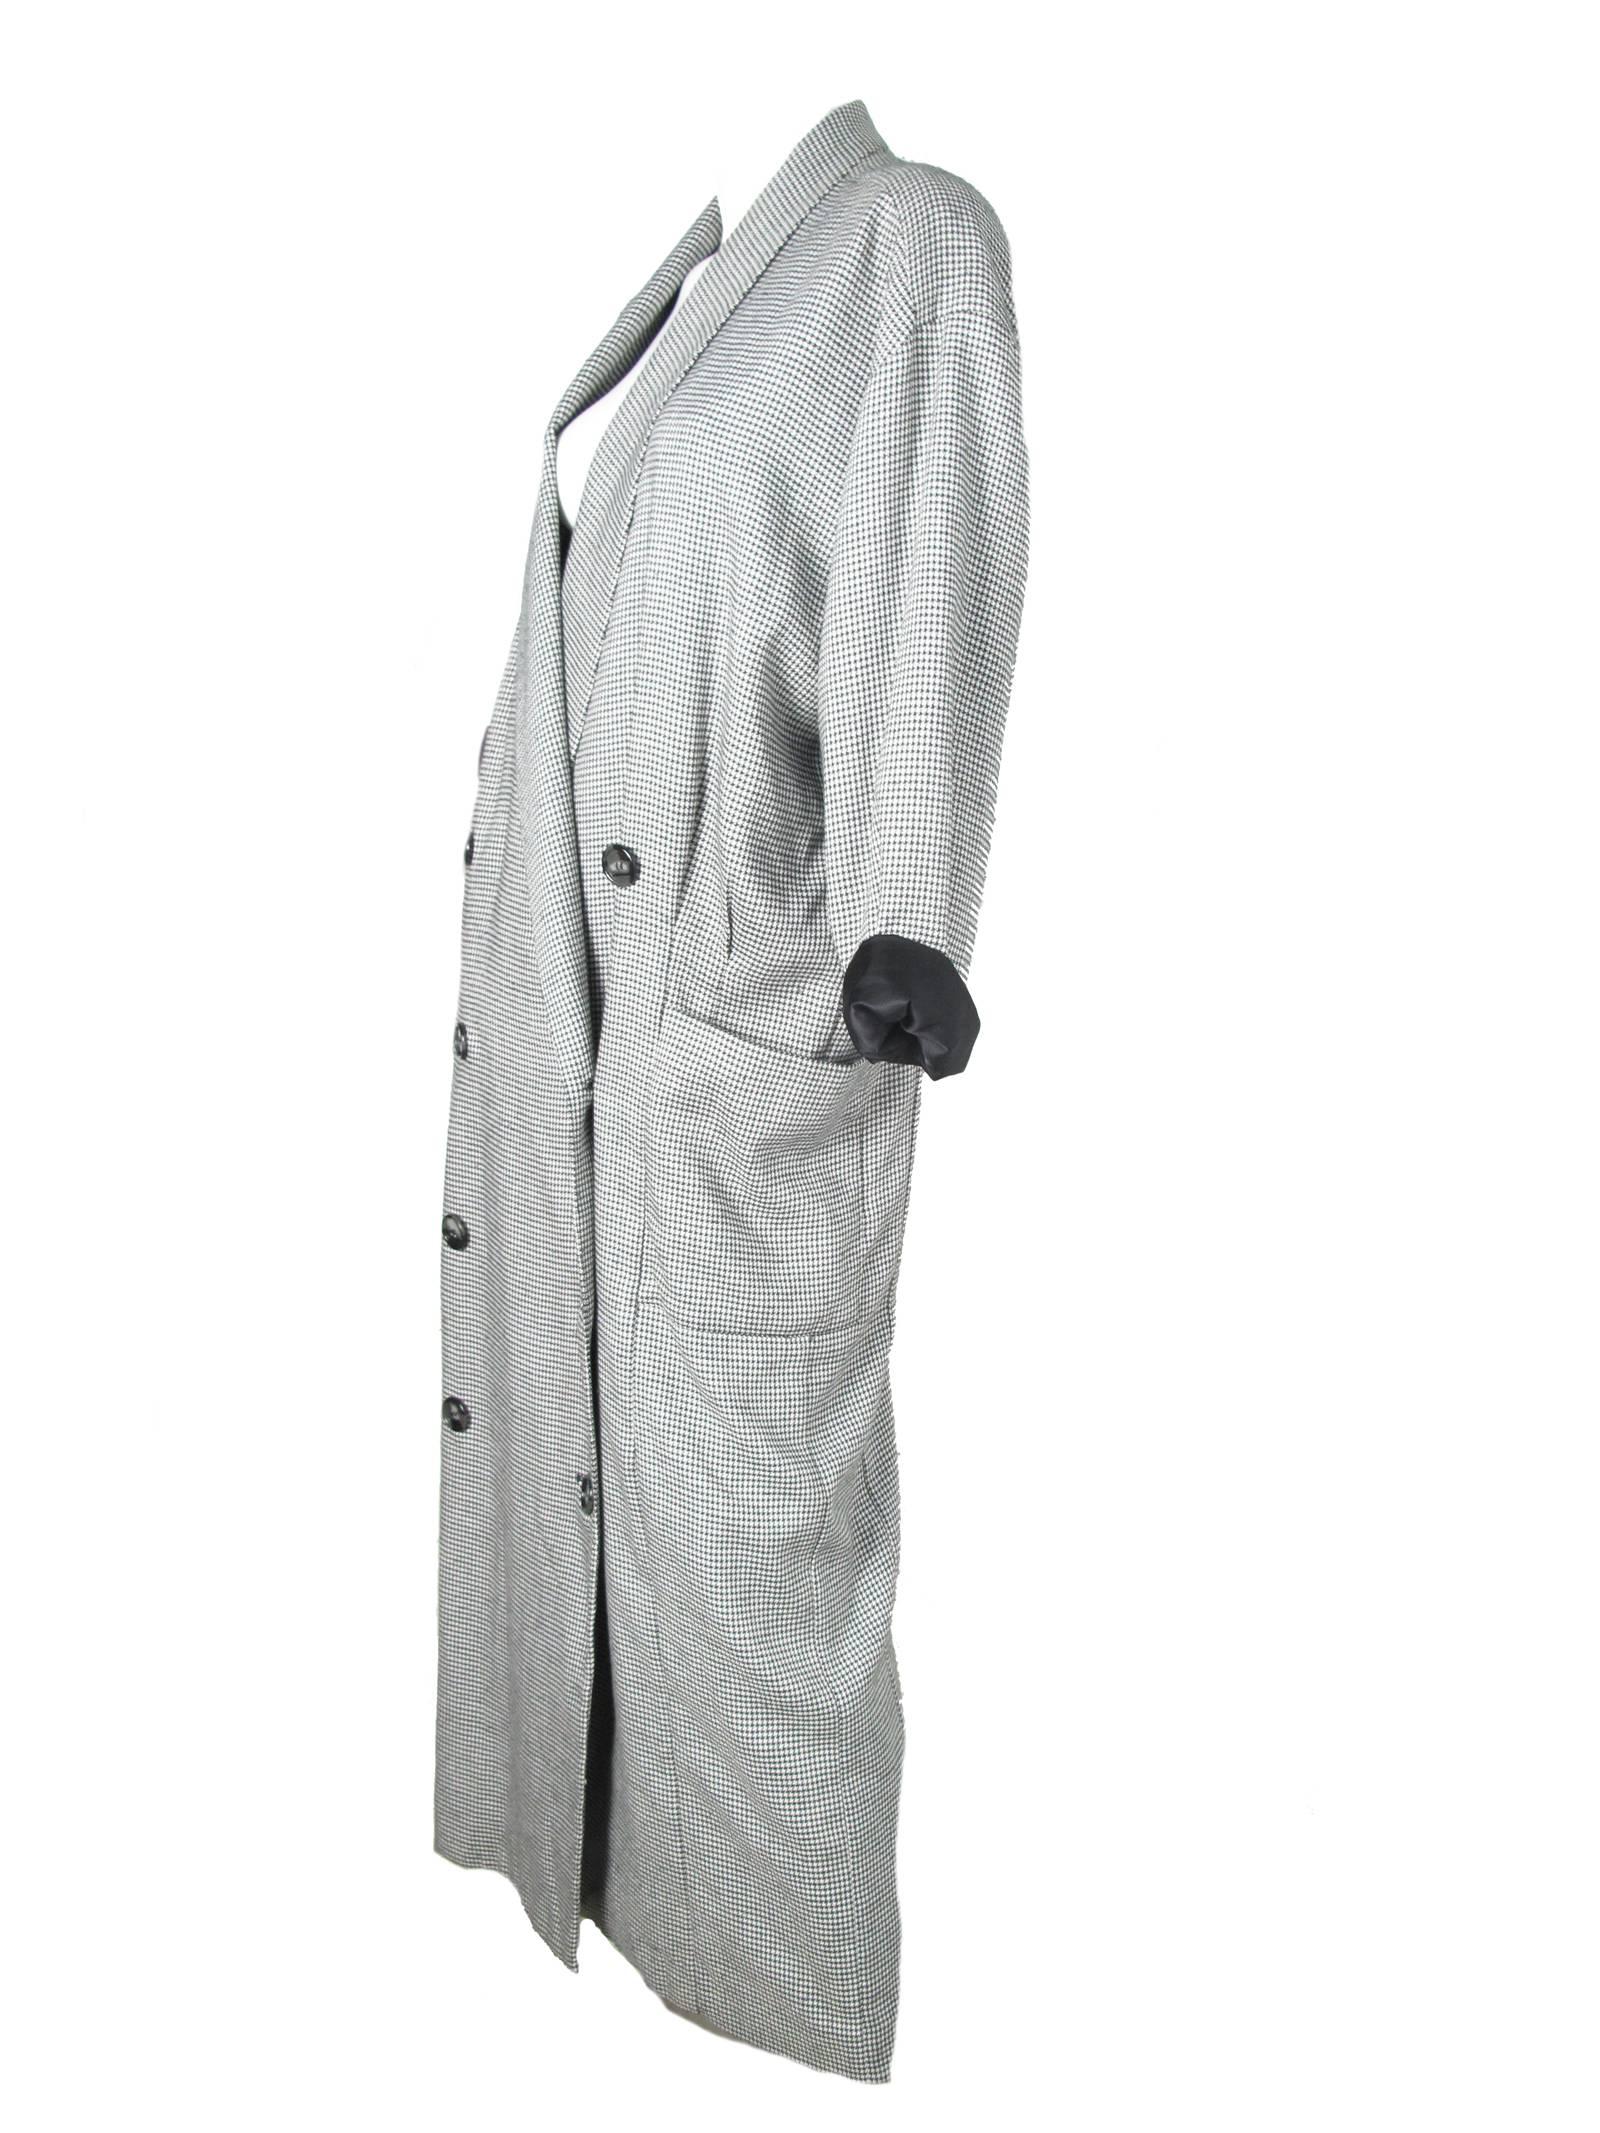 1980s Norma Kamali black and white light weight wool oversized herringbone coat.  Two front pockets. Condition: Excellent vintage condition. Size 6

Measurements ( approximately )
50